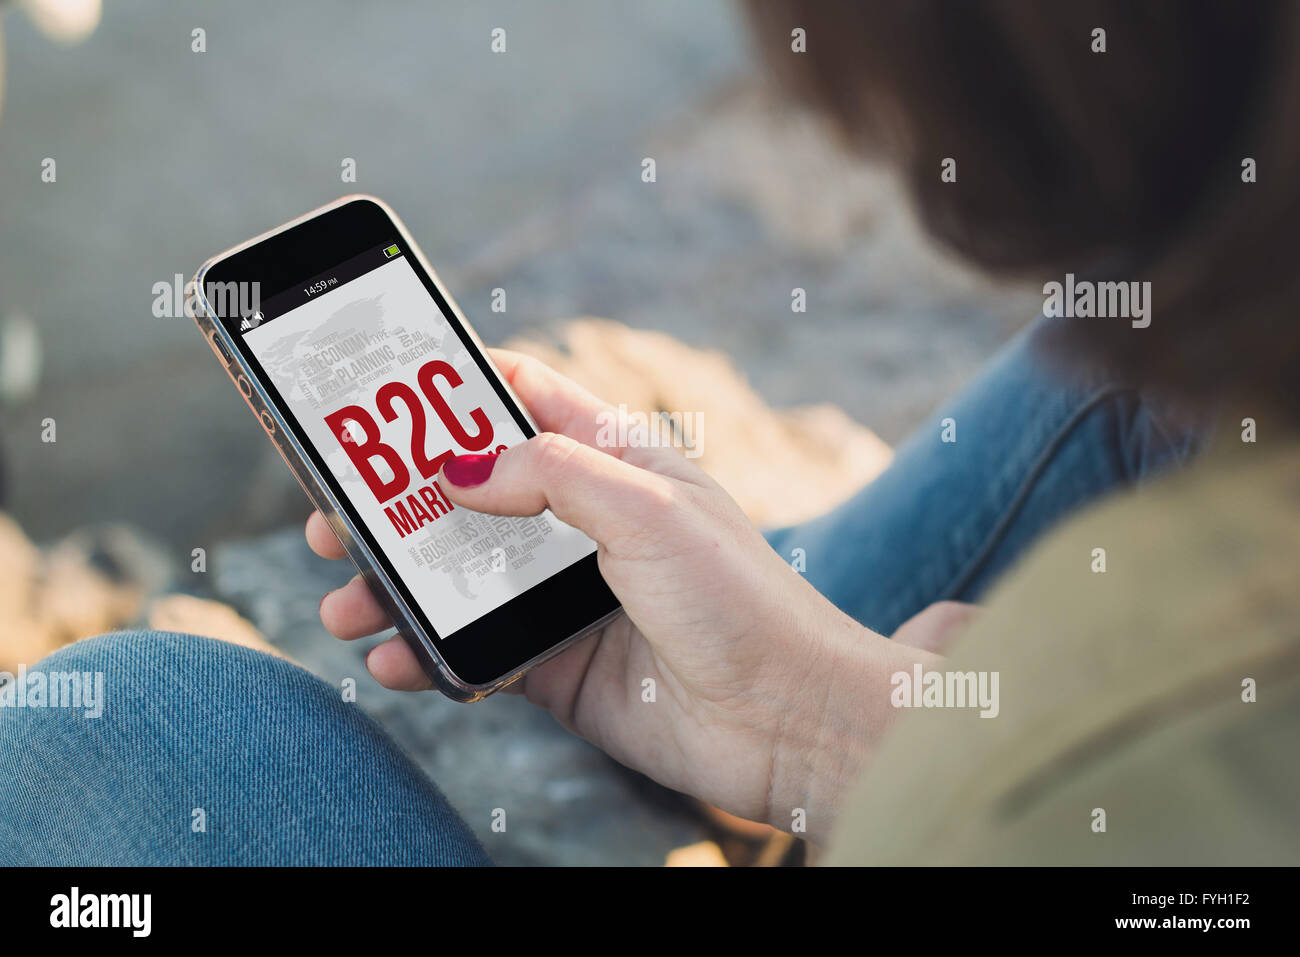 woman holding a smartphone and touching the screen shoing b2c marketing concept. All screen graphics are made up. Stock Photo